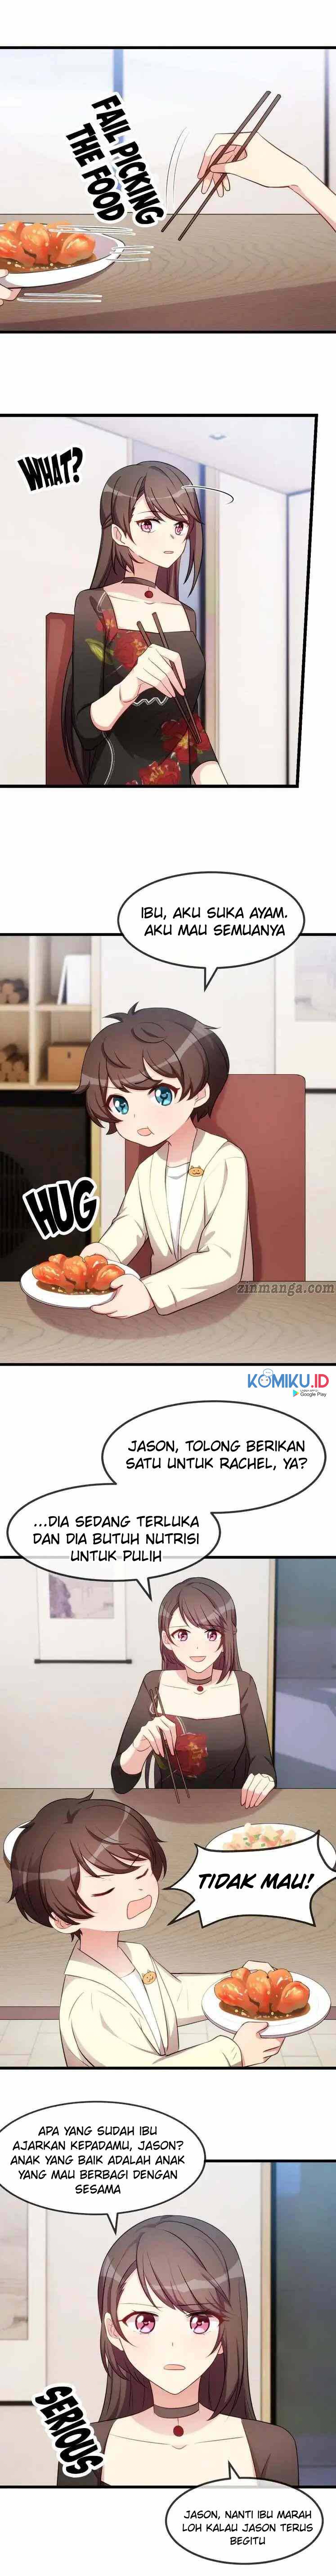 CEO’s Sudden Proposal Chapter 251 4